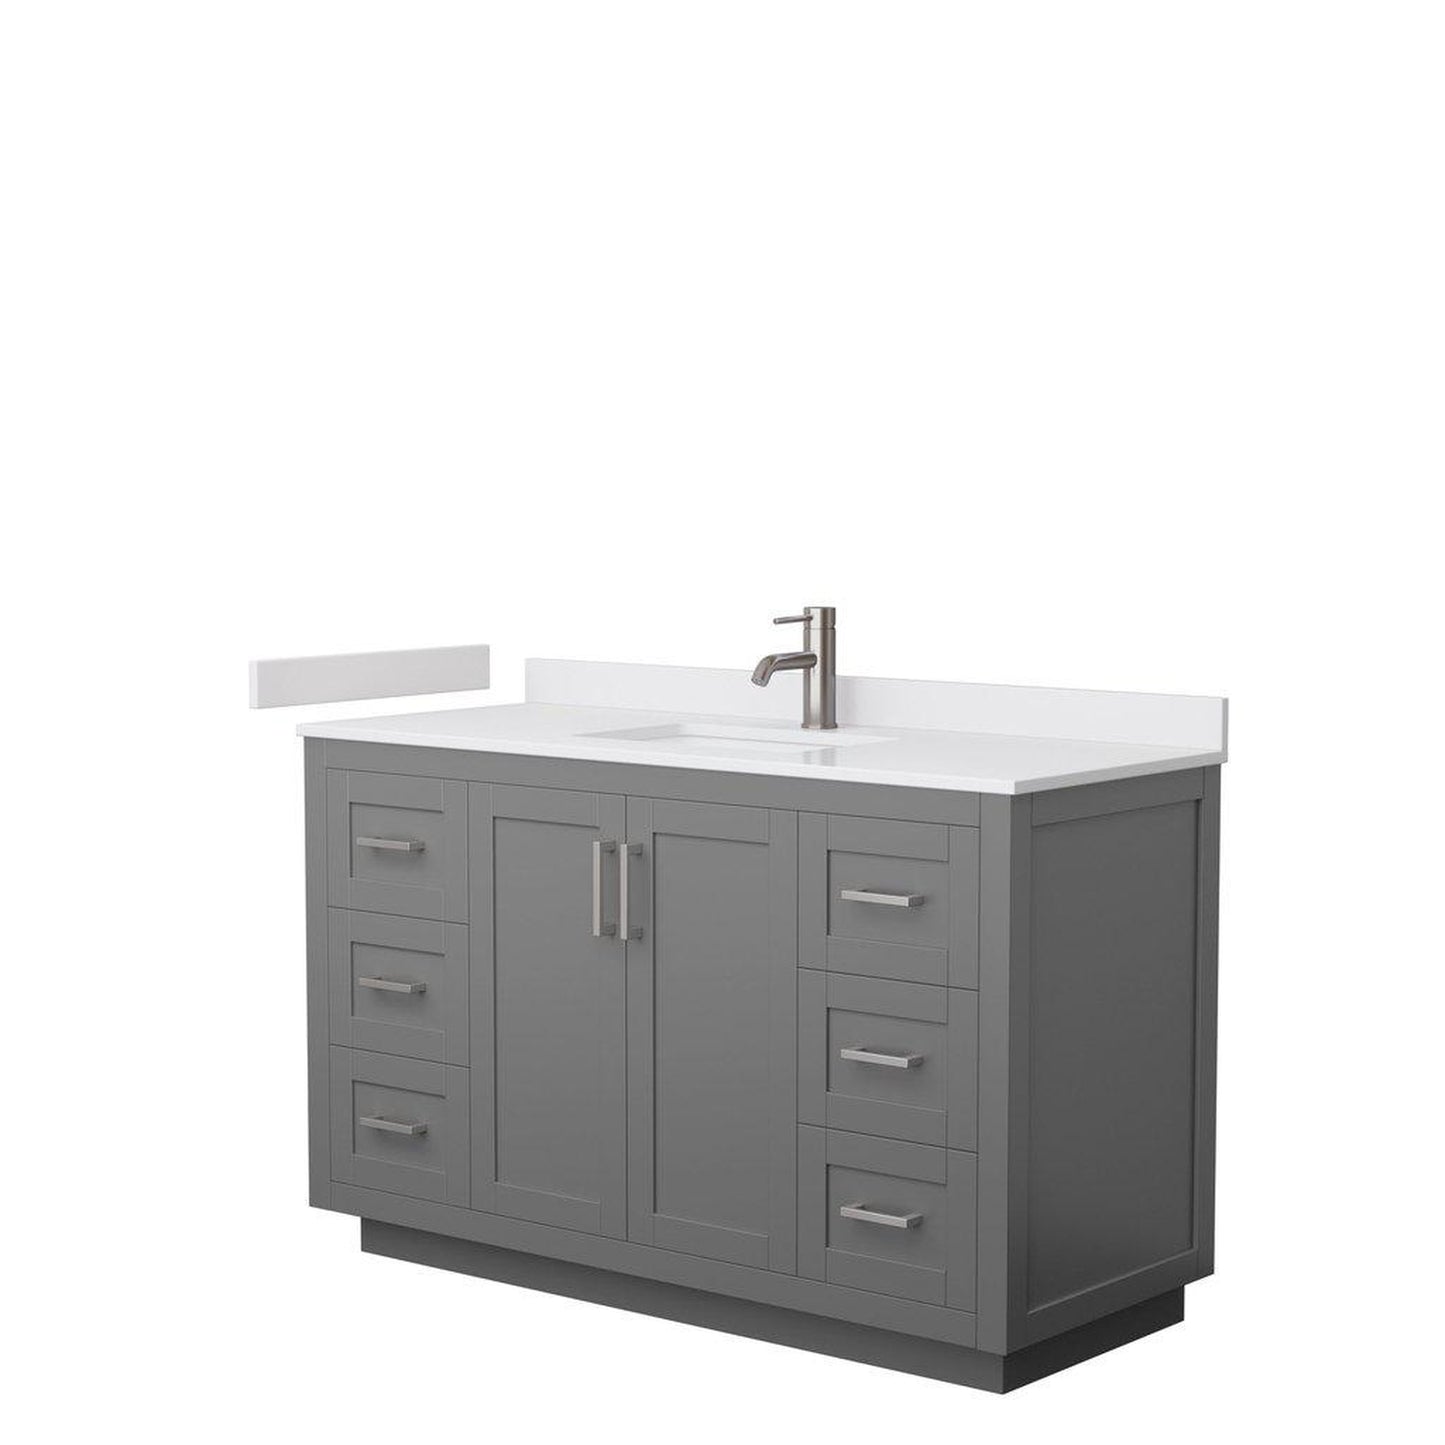 Wyndham Collection Miranda 54" Single Bathroom Dark Gray Vanity Set With White Cultured Marble Countertop, Undermount Square Sink, And Brushed Nickel Trim